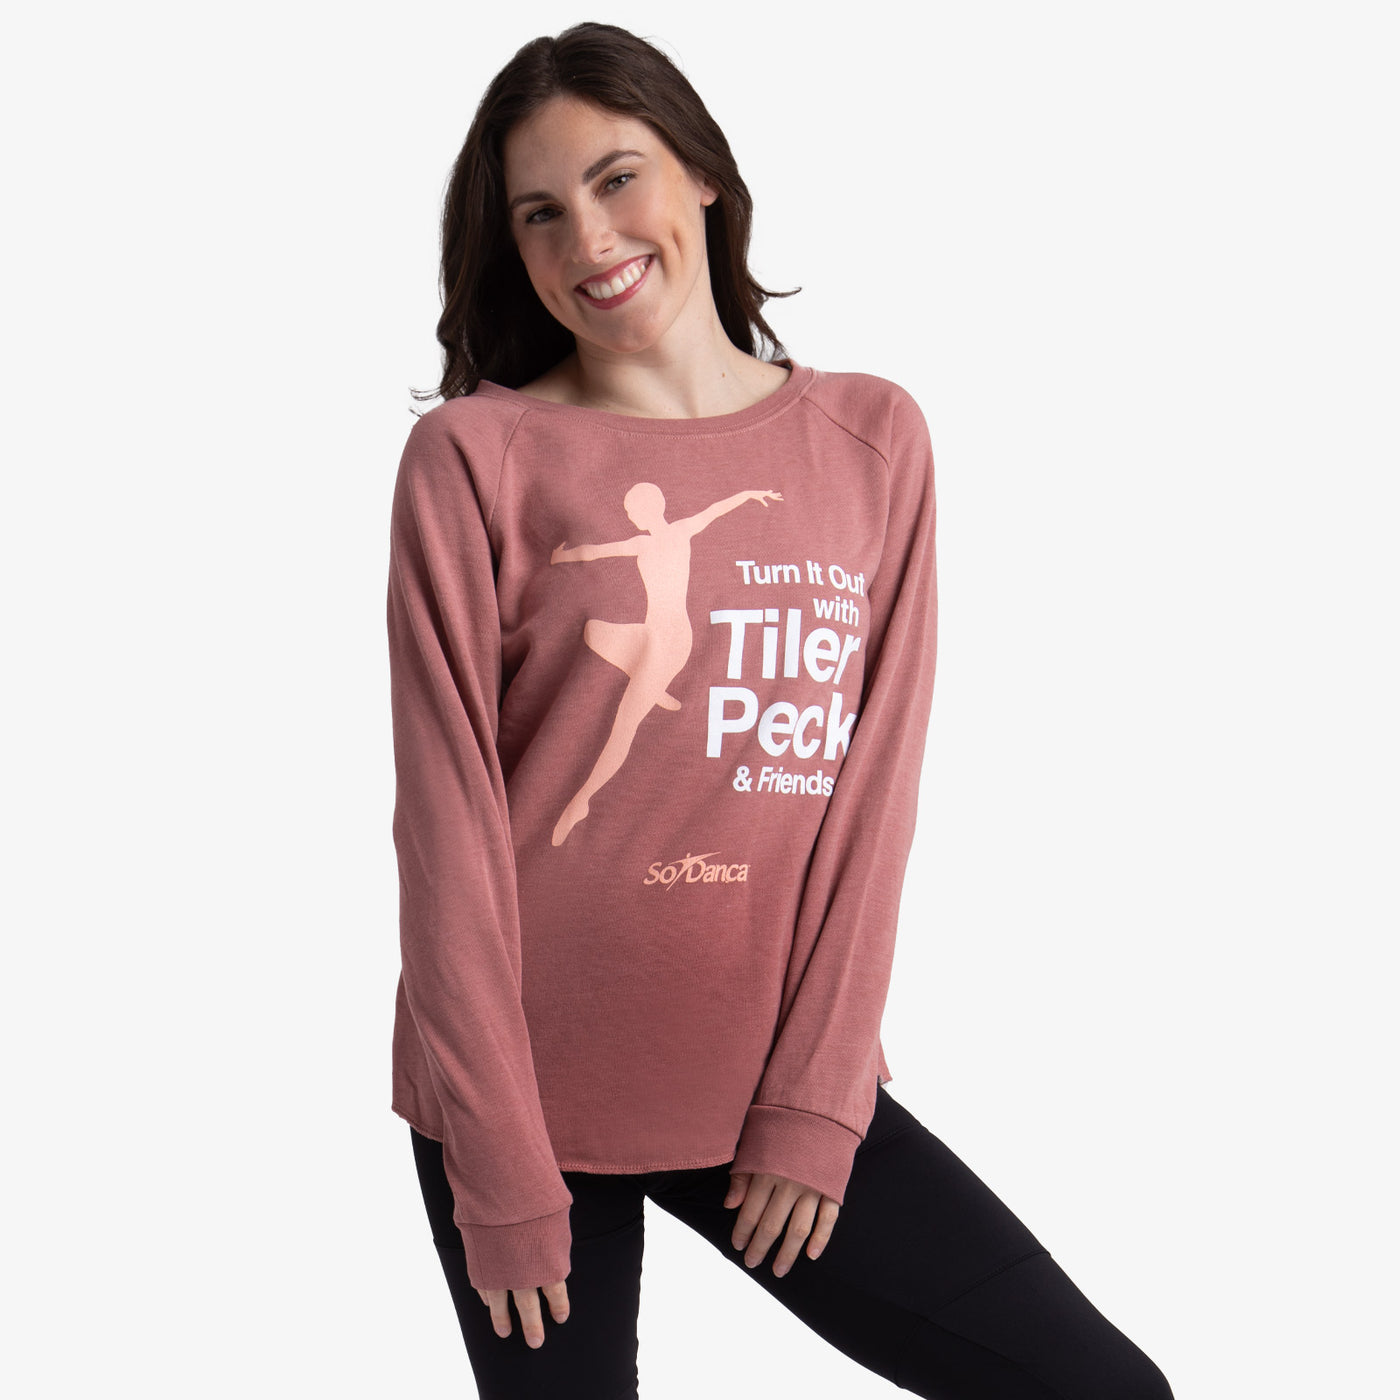 Turn it Out with Tiler Peck Sweatshirt - TPS01